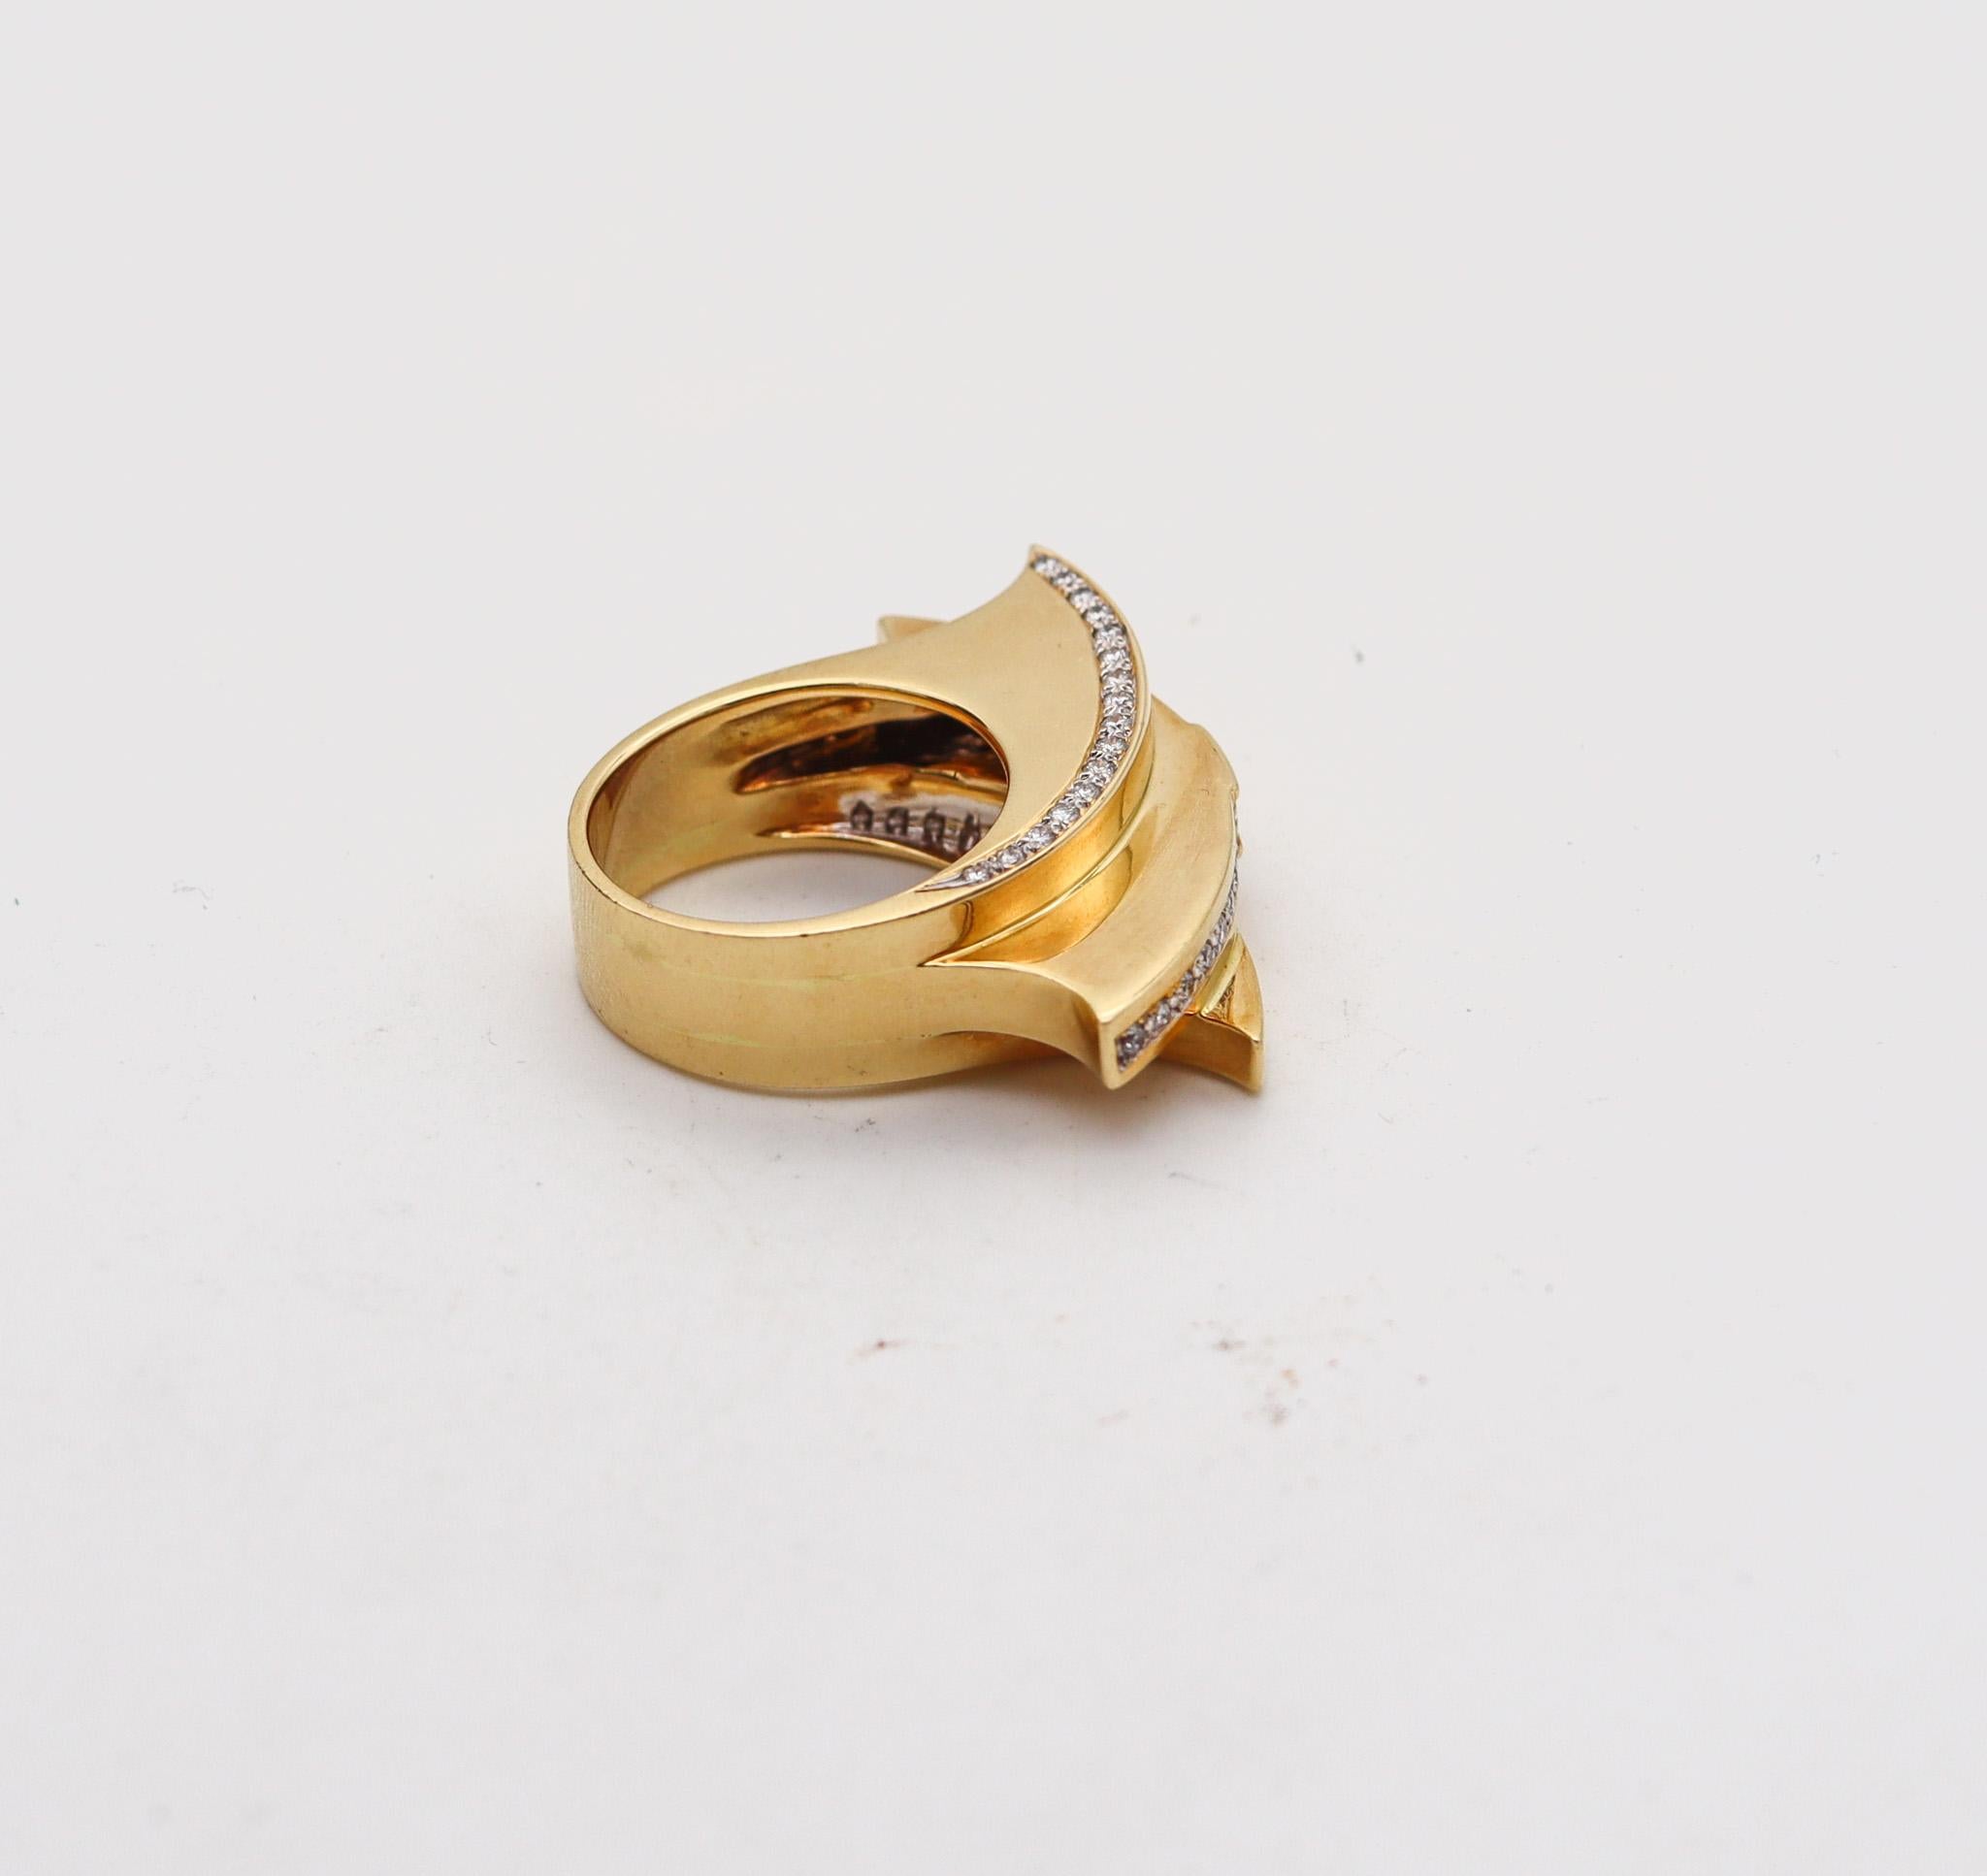 Studio Designer Geometric Sculptural Ring In 18Kt Gold With 1.62 Ctw Diamonds In Excellent Condition For Sale In Miami, FL